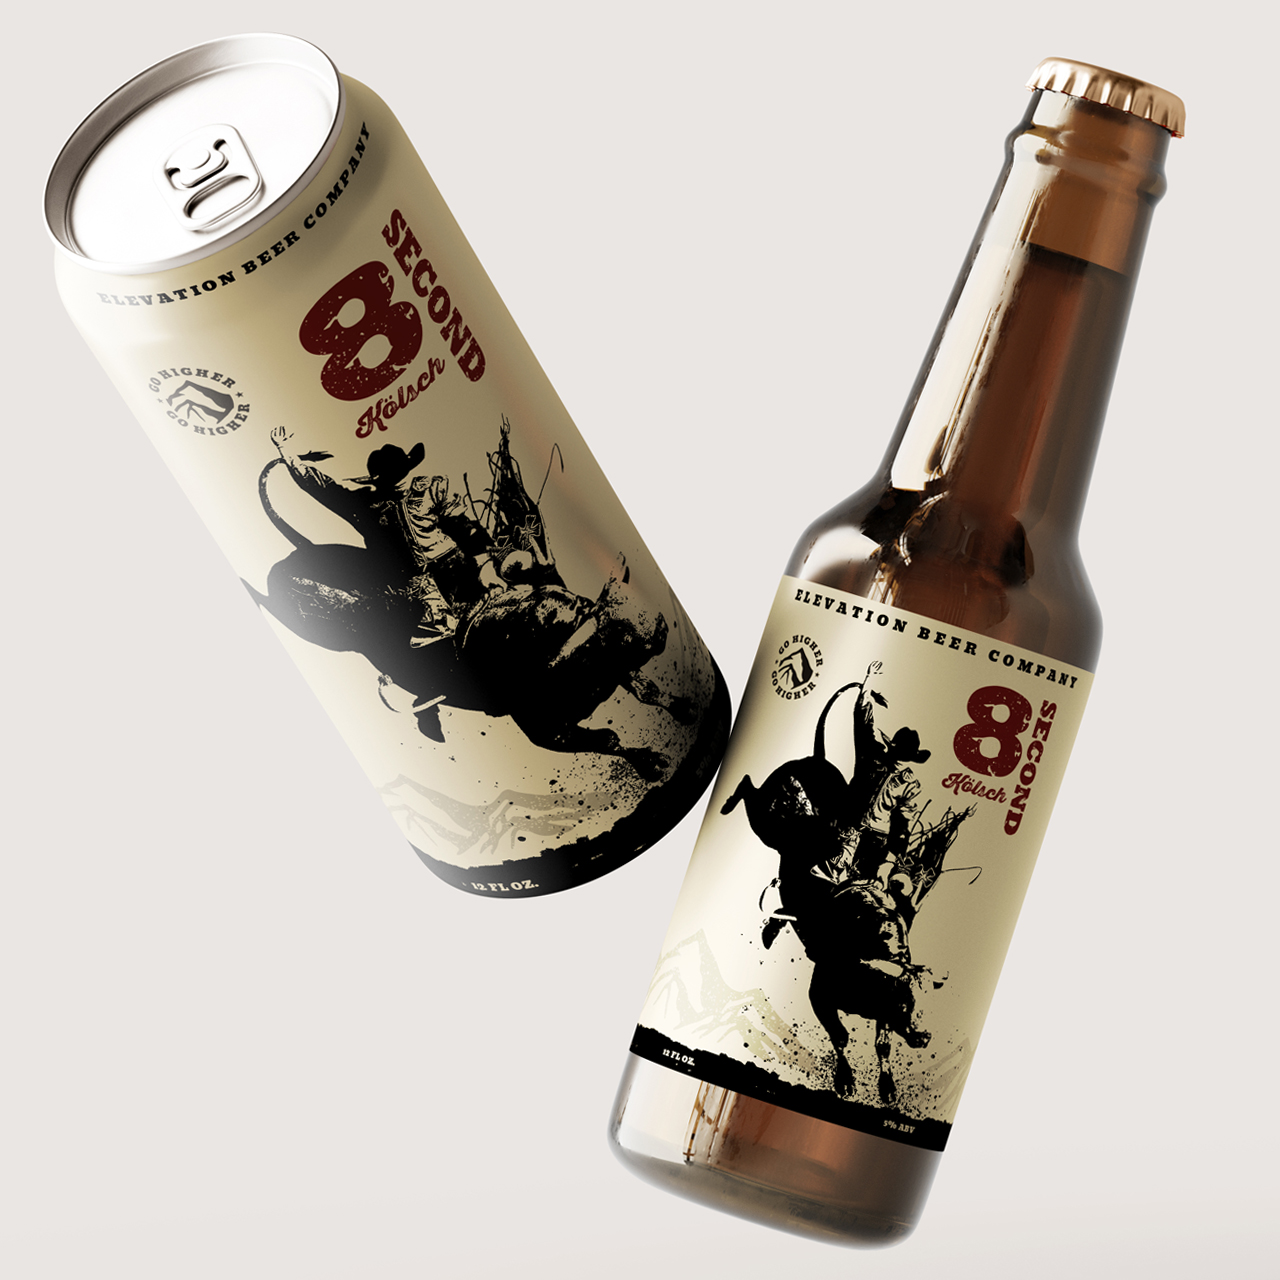 Image of Elevation Beer Company's Eight-Second Kolsch beer can and bottle package design with can and bottle floating in the air